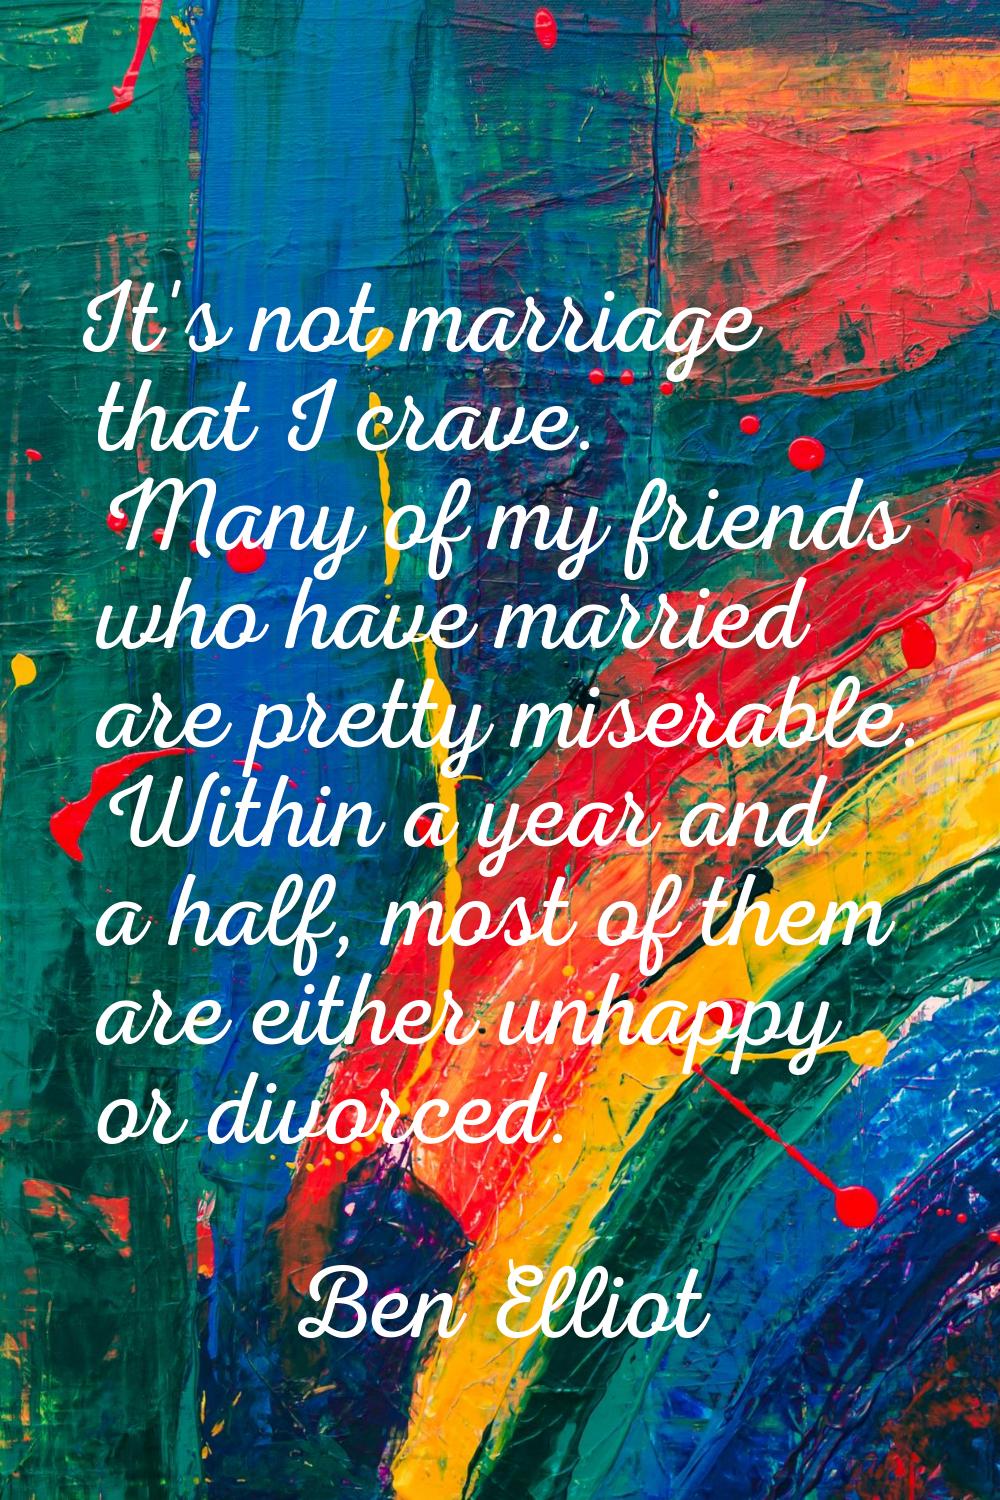 It's not marriage that I crave. Many of my friends who have married are pretty miserable. Within a 